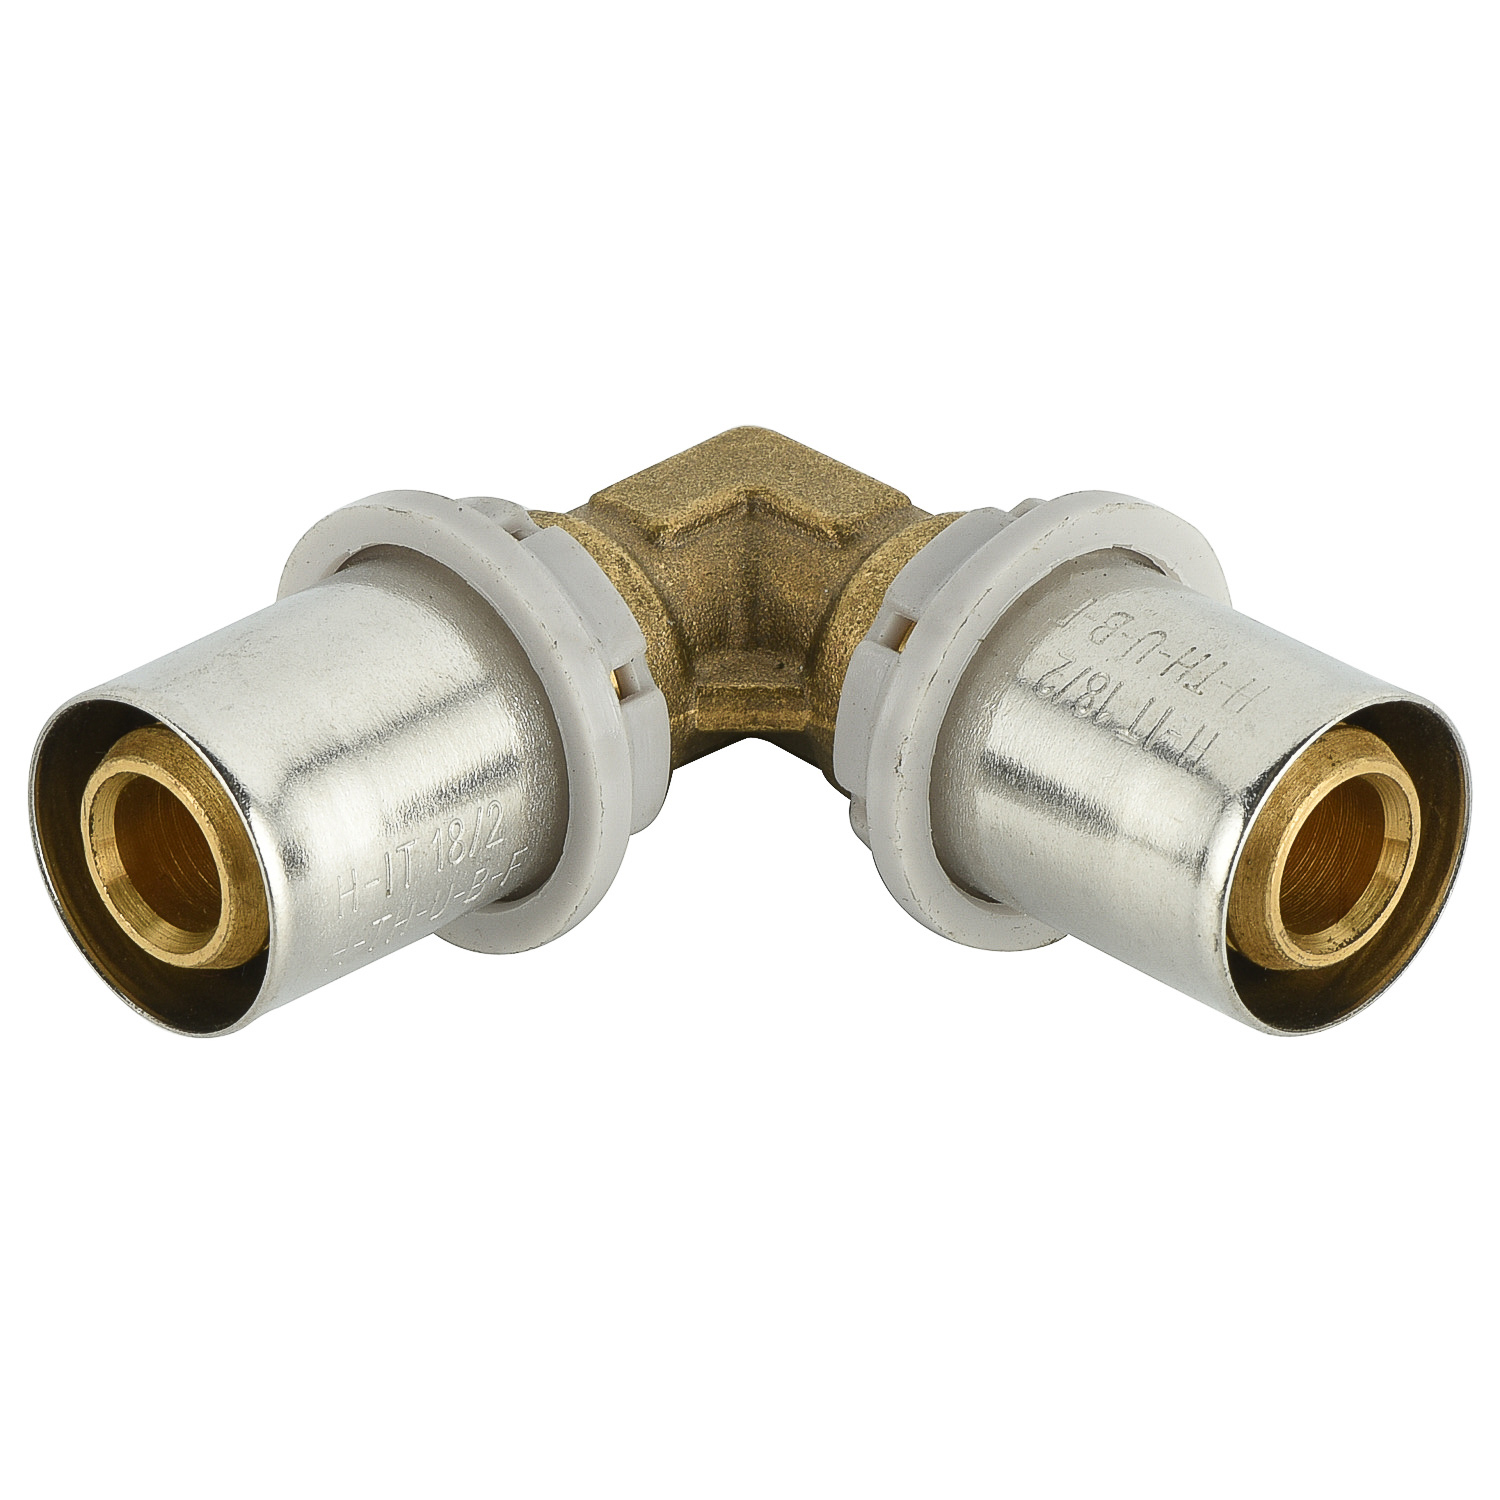 brass u type press elbow male connector fittings for plumbing heating multiayer pex al pex pipe